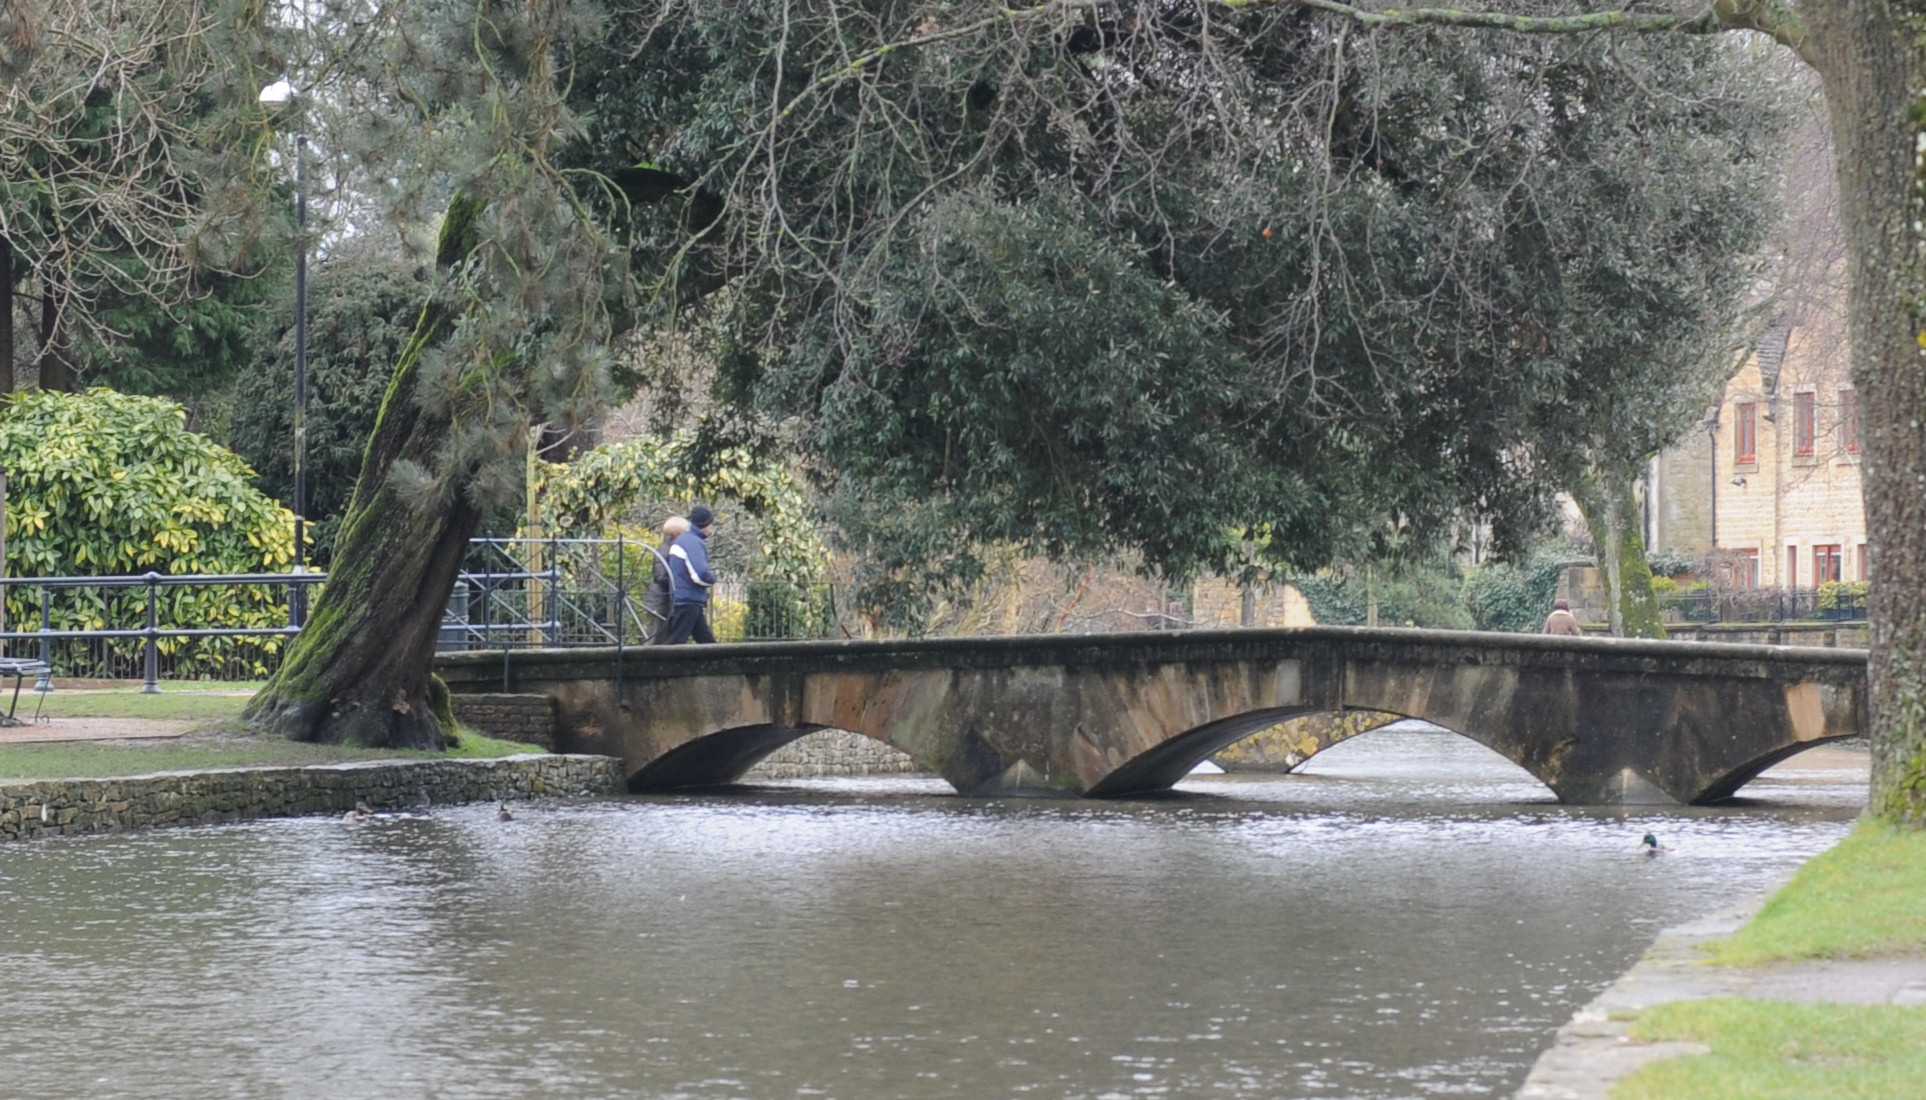 Tranquil Windrush - watches the Bourton 10k race